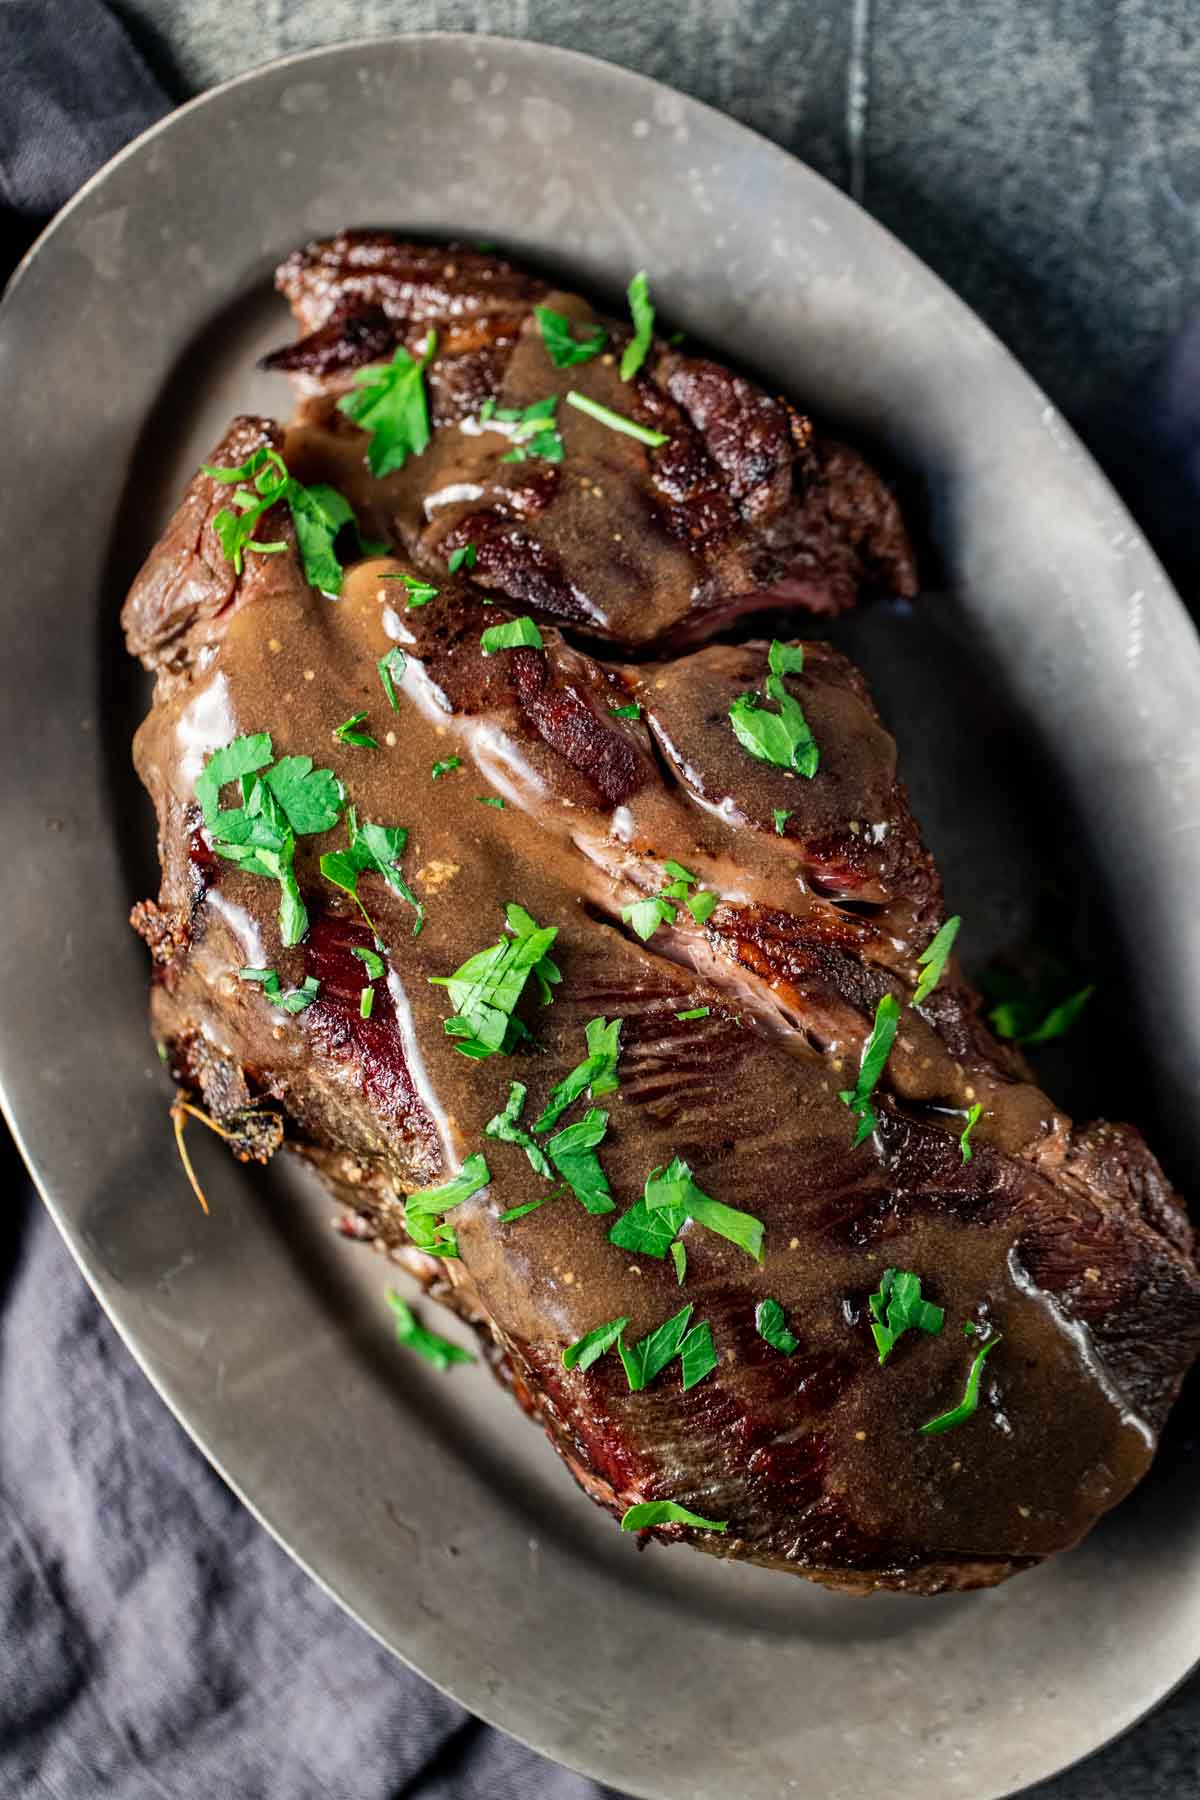 Cook Sous Vide With a Crock Pot for Perfect Roasts : 8 Steps (with